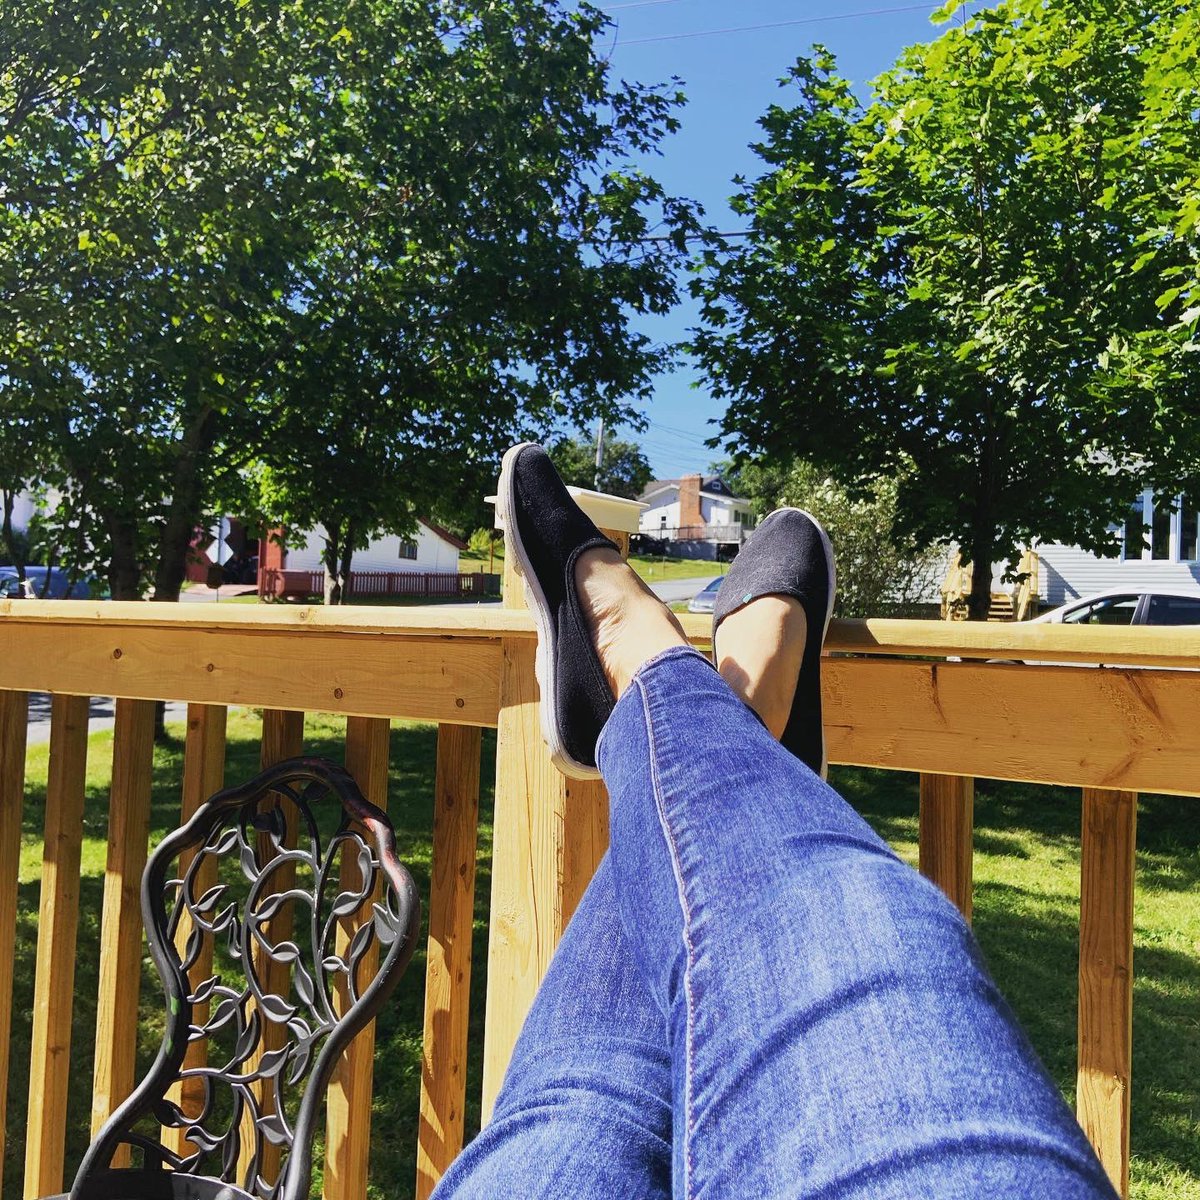 There are worse ways to spend your Saturday! #baygirl #newfoundlandlife #SaturdayMorning #nlwx